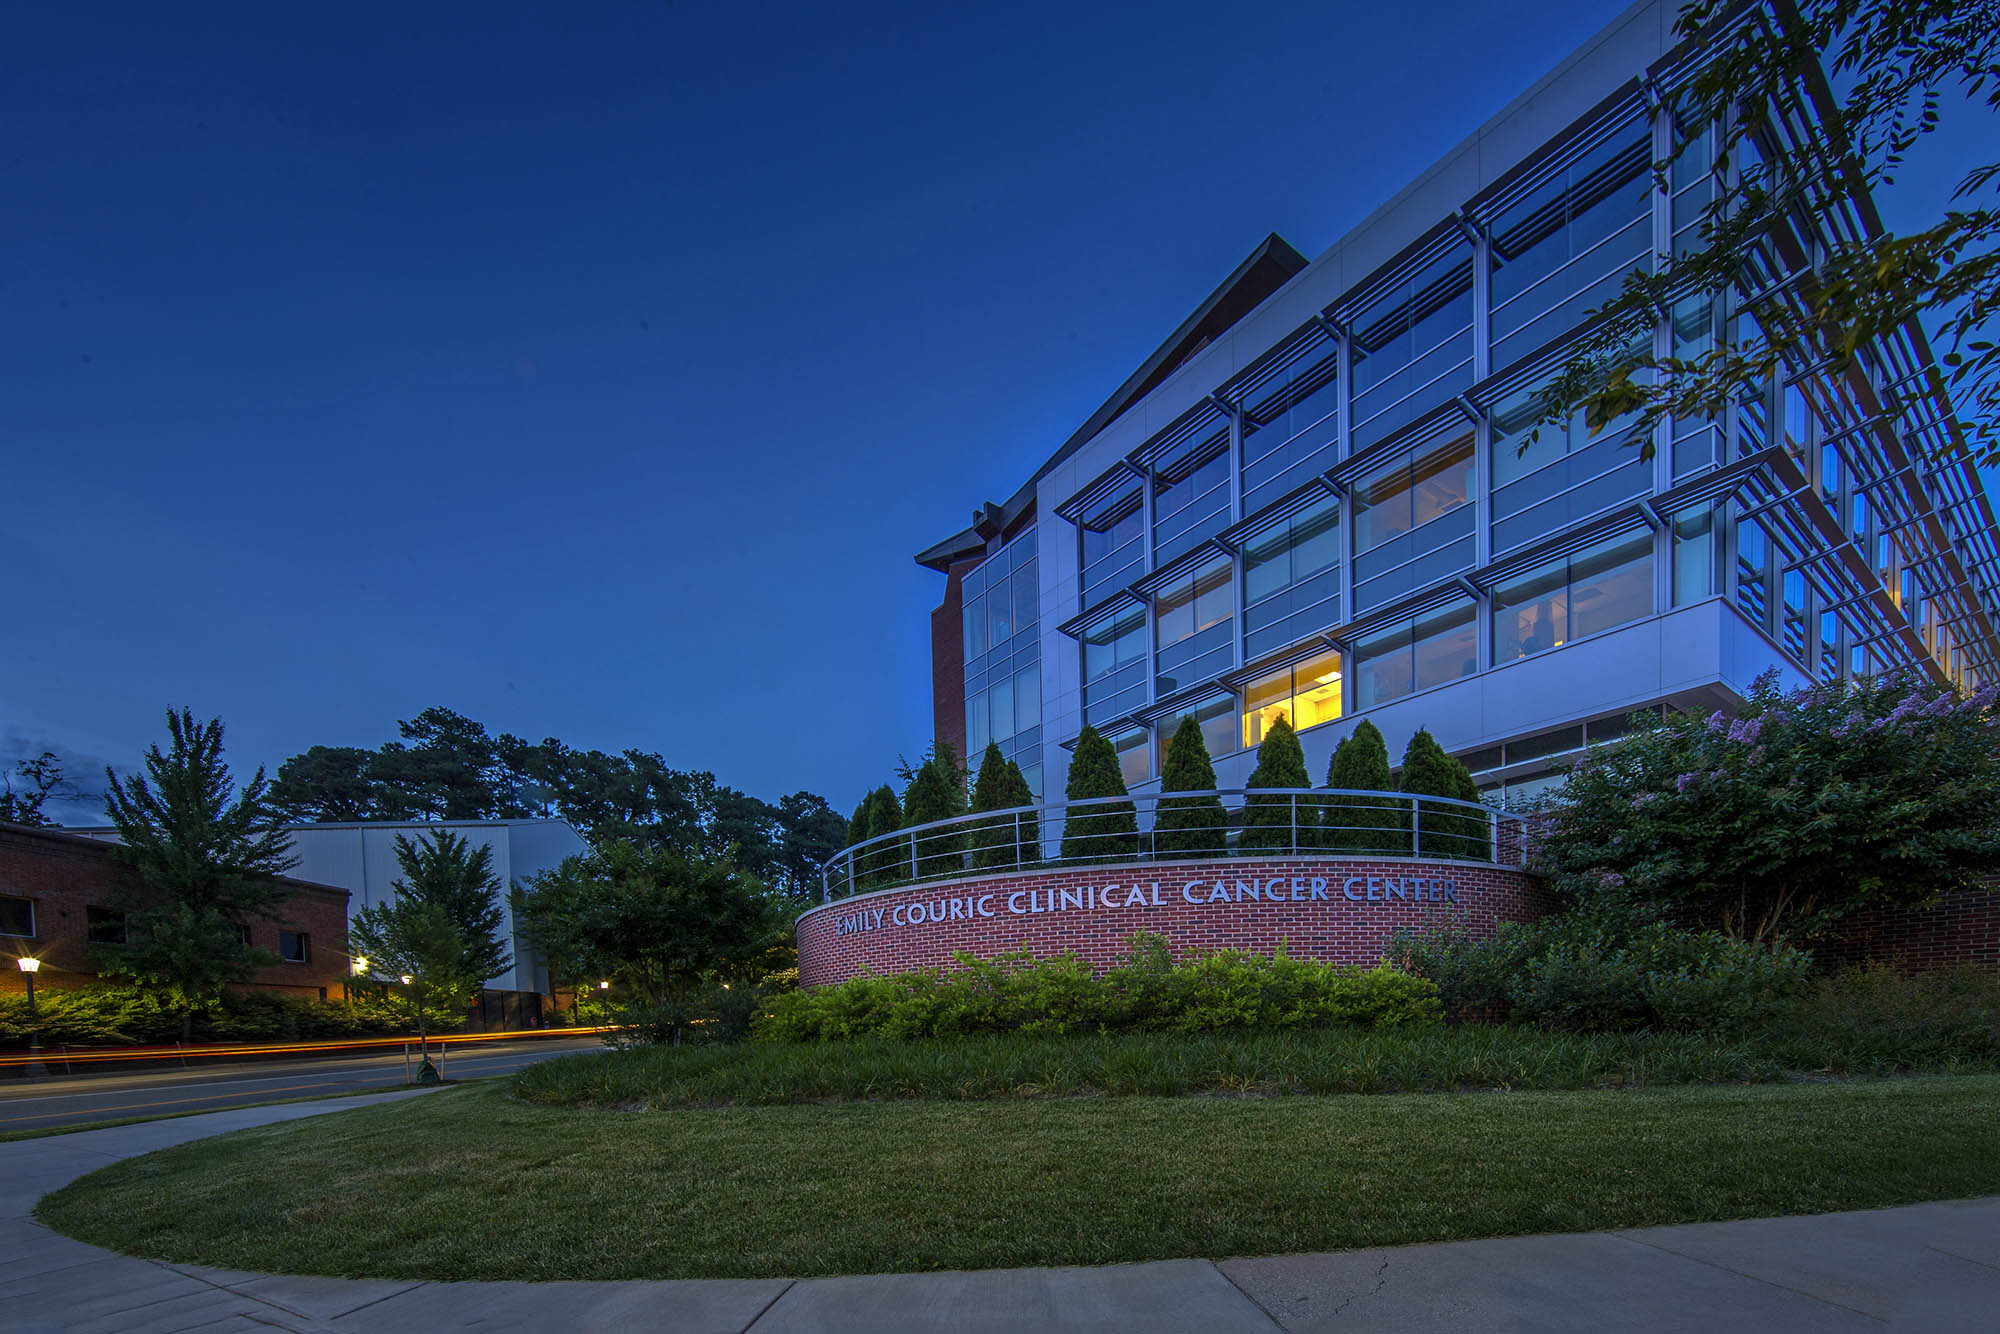 View of the Emily Couric Clinical Cancer Center at dark